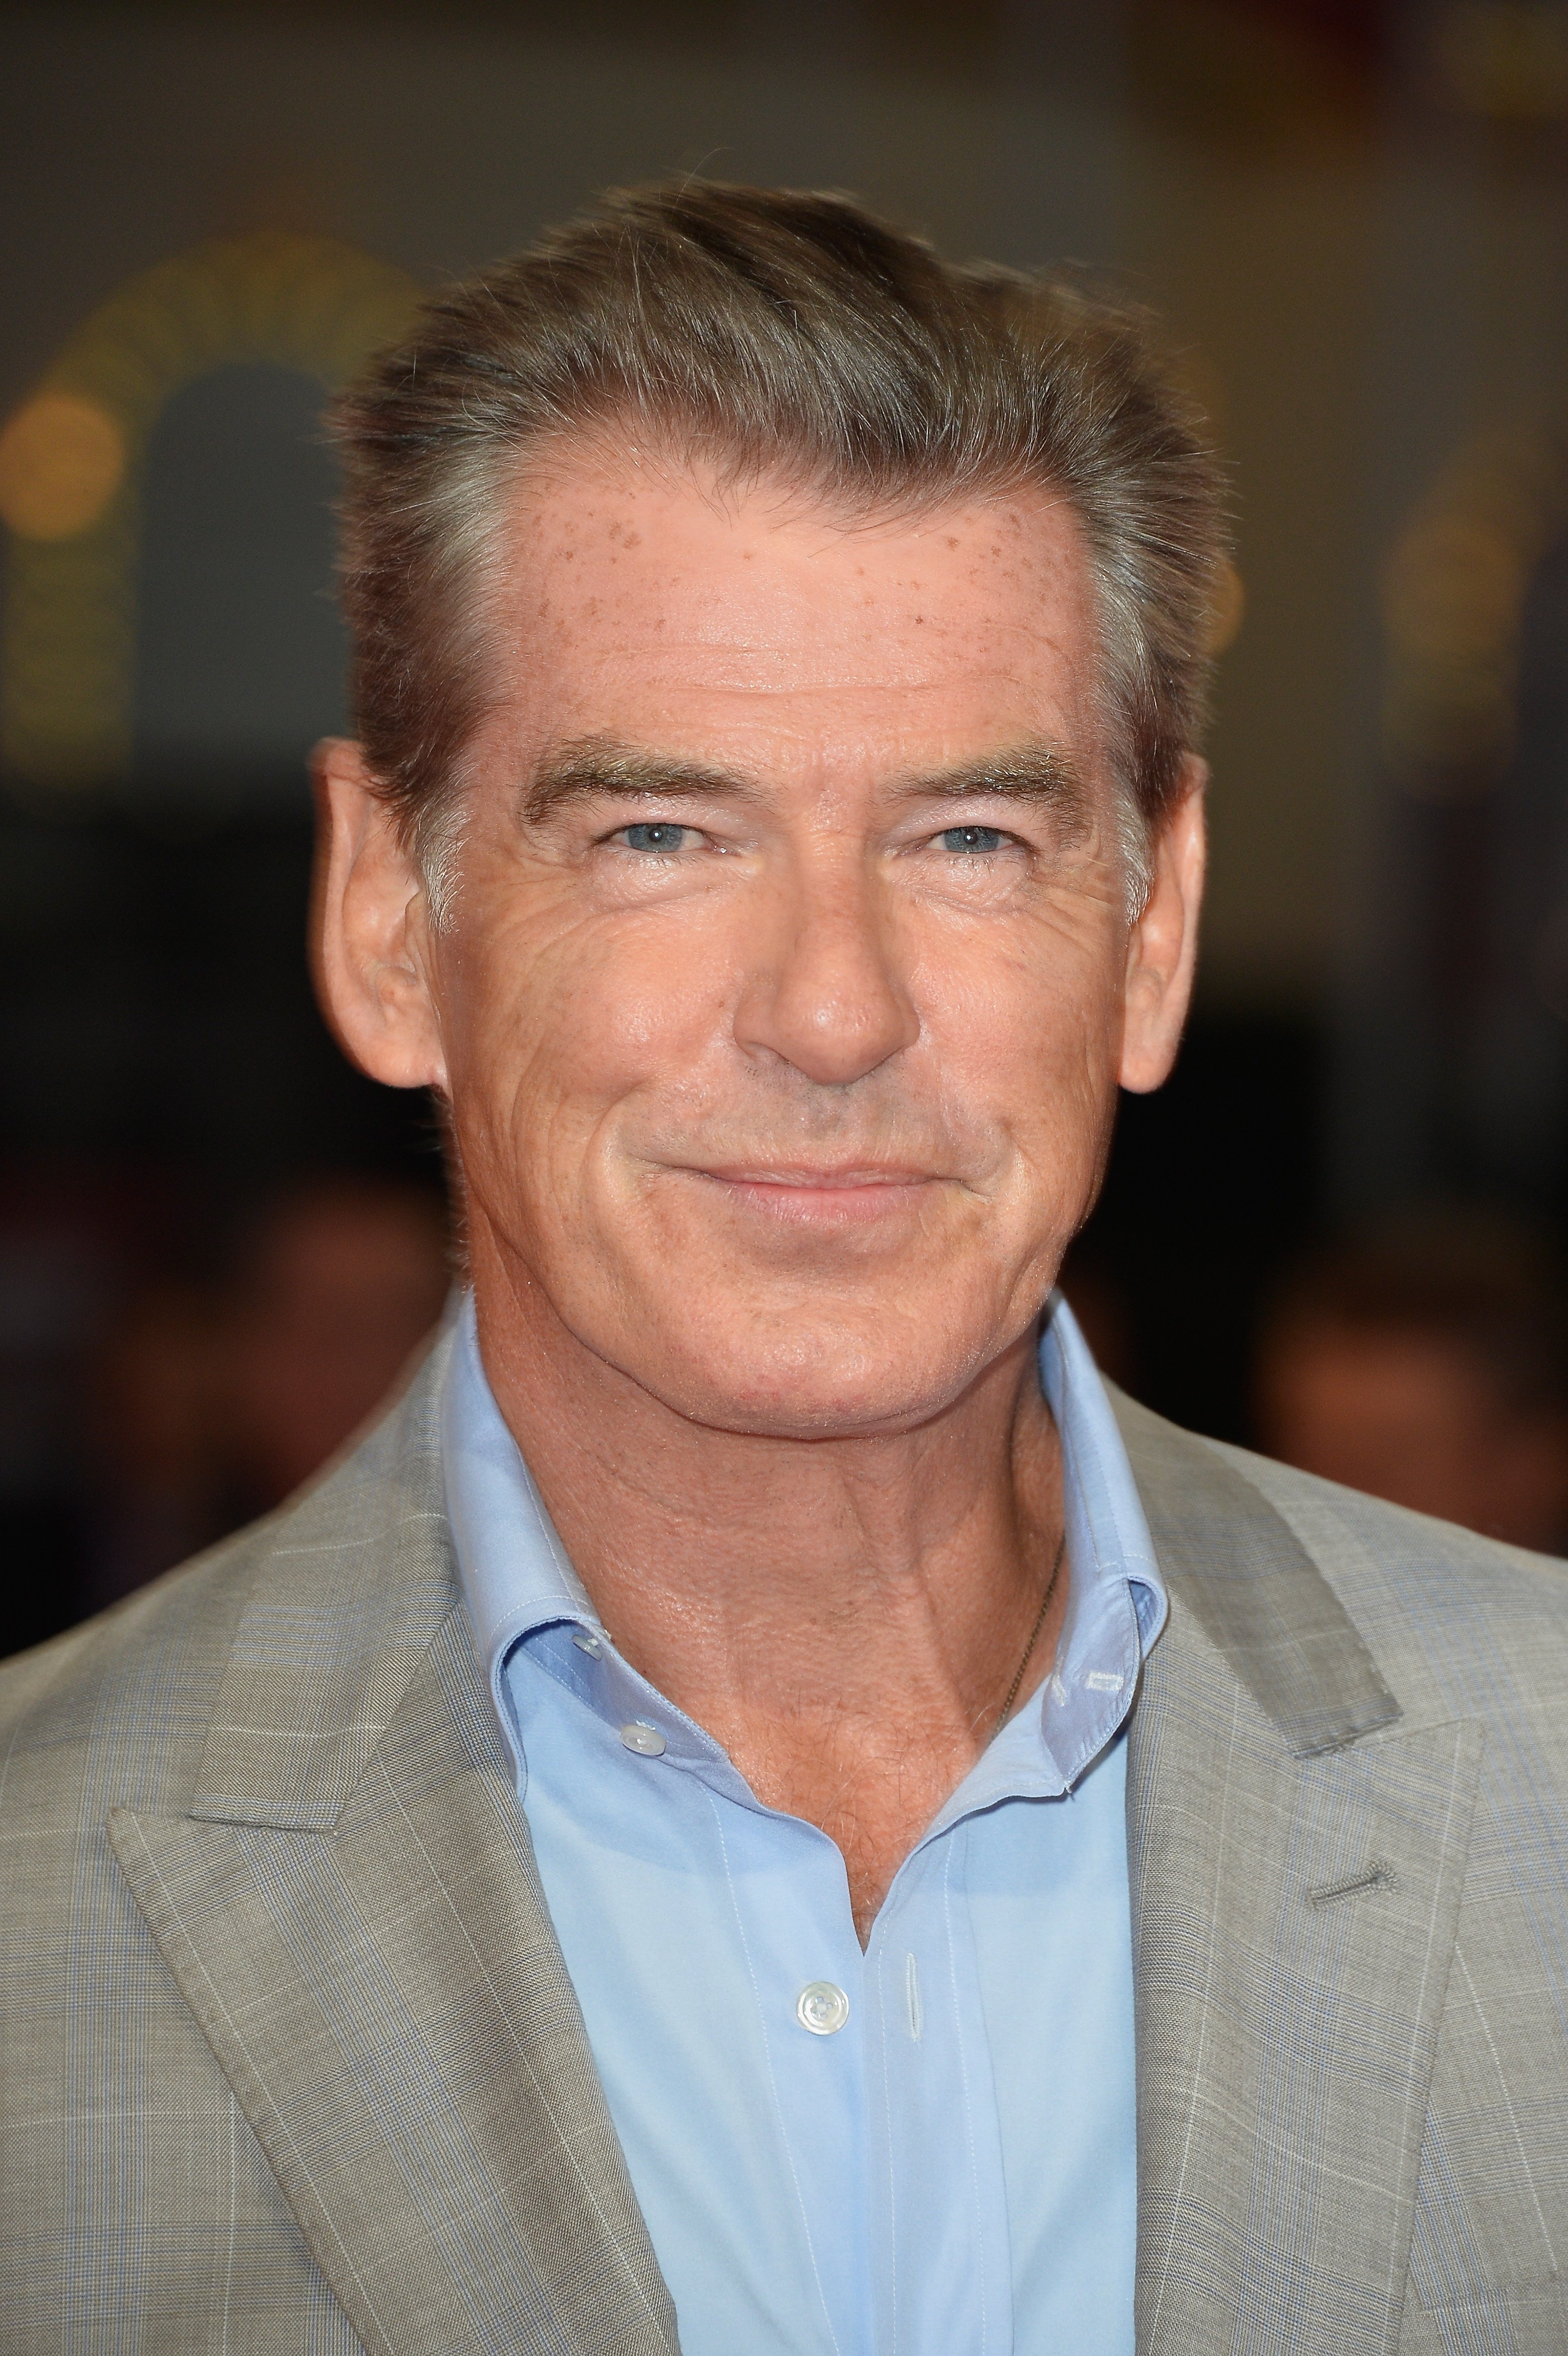 Pierce Brosnam attends the 'Pasolini' premiere on September 11, 2014 in Deauville, France. | Photo: GettyImages